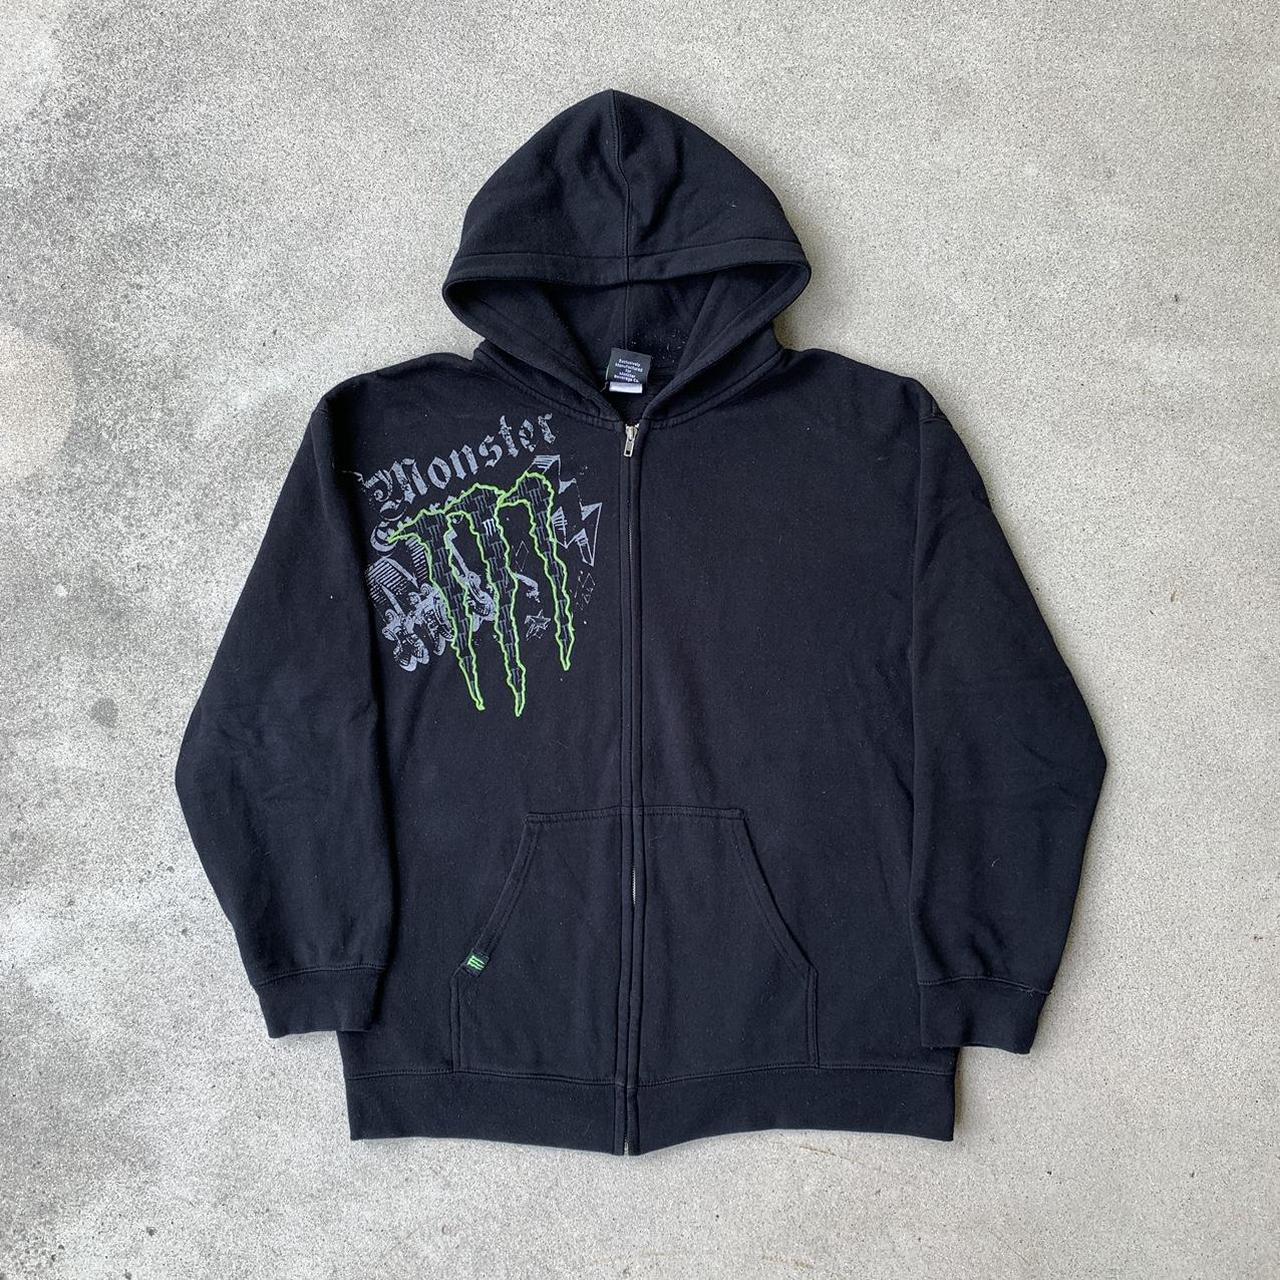 Affliction Men's Black and Green Hoodie